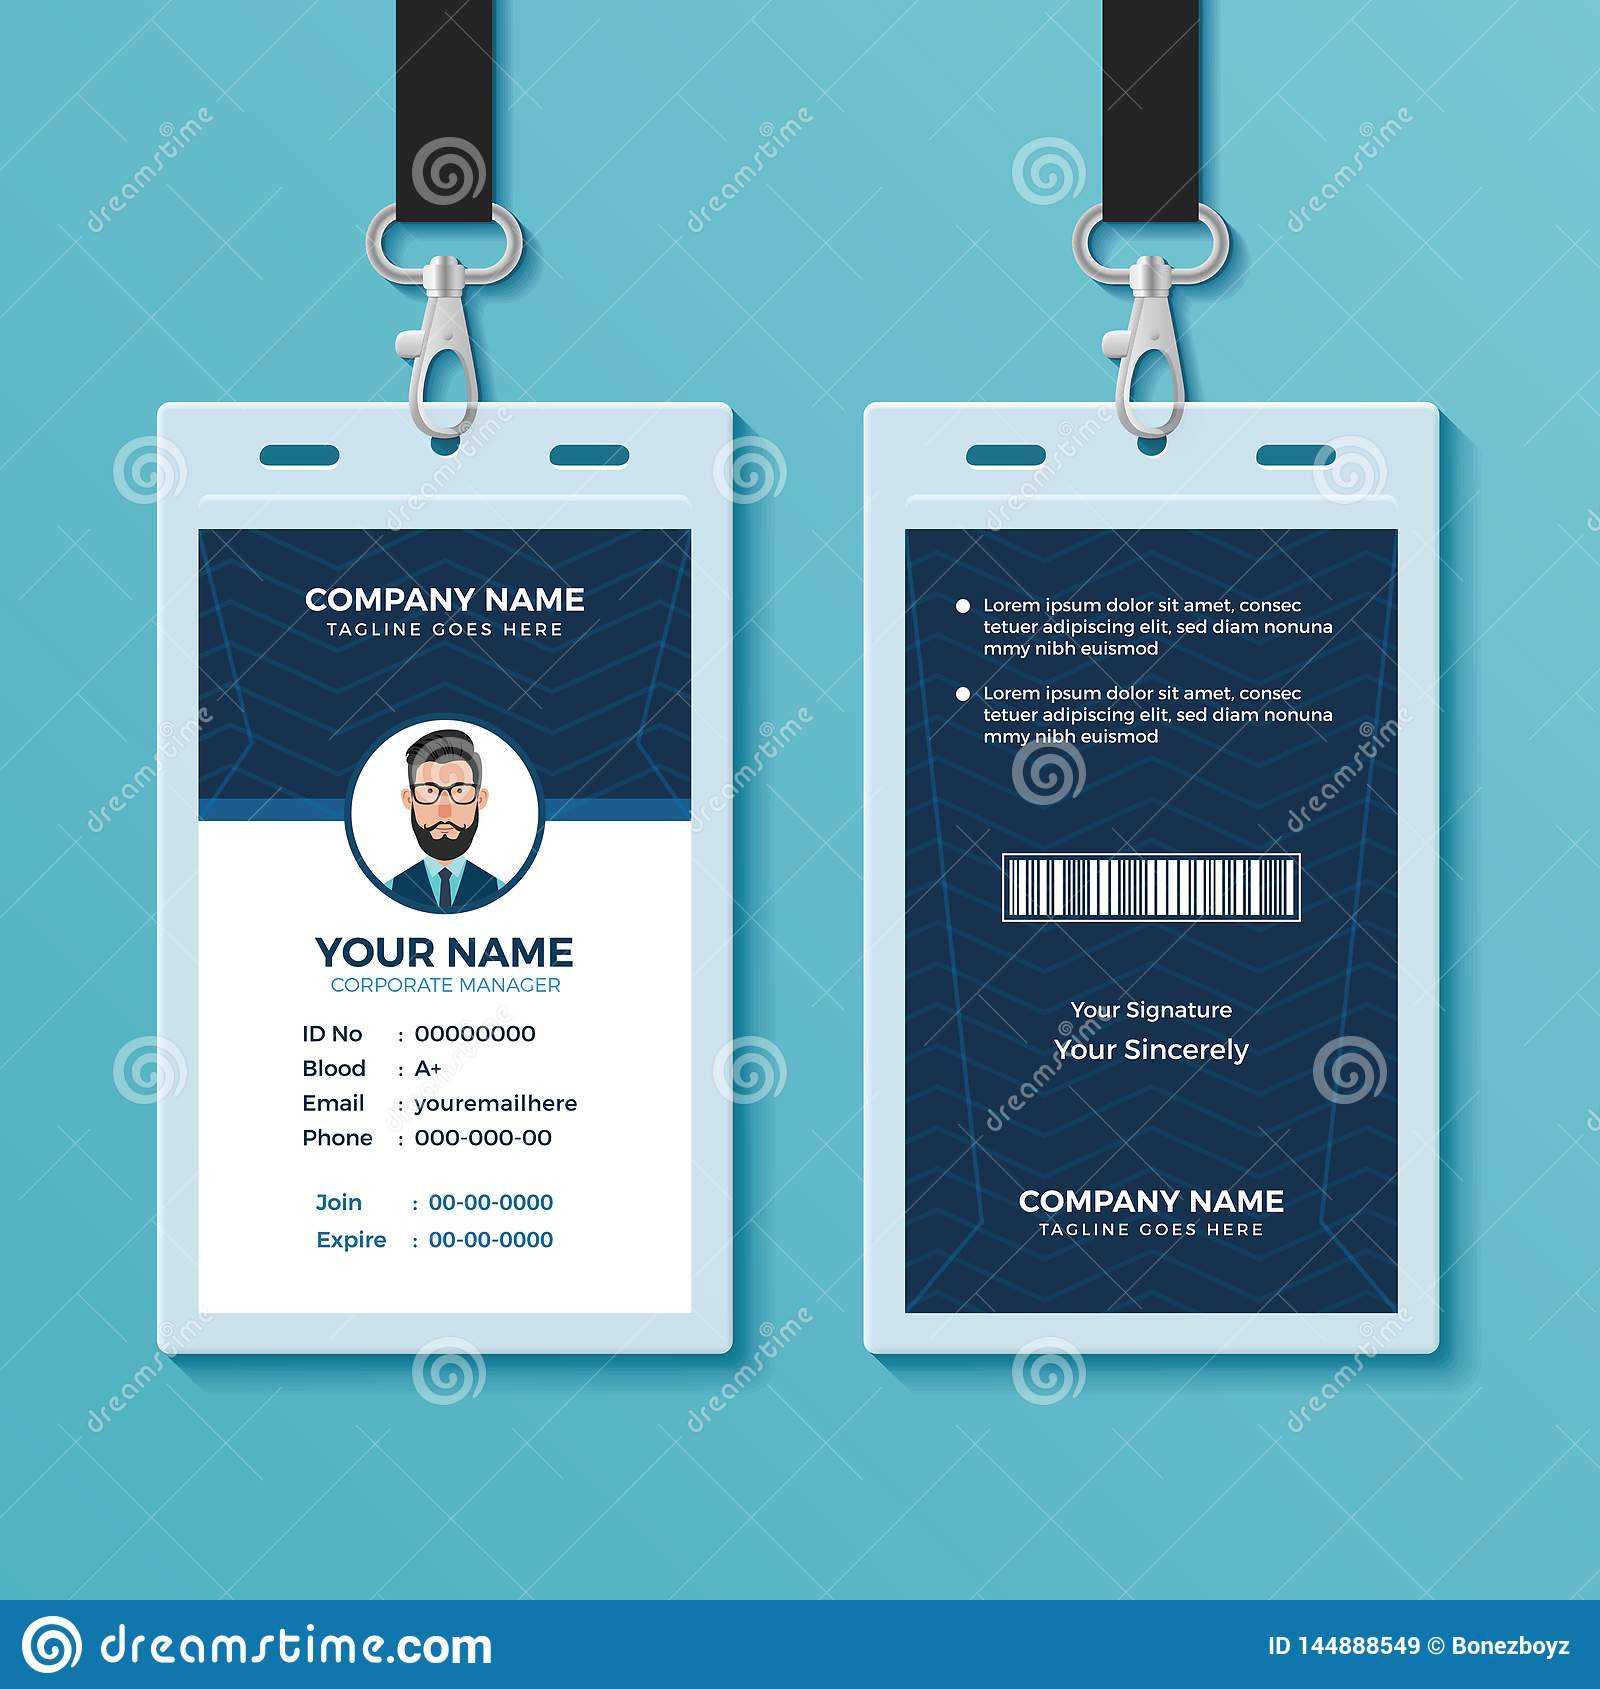 Modern And Clean Id Card Design Template Stock Vector In Conference Id Card Template